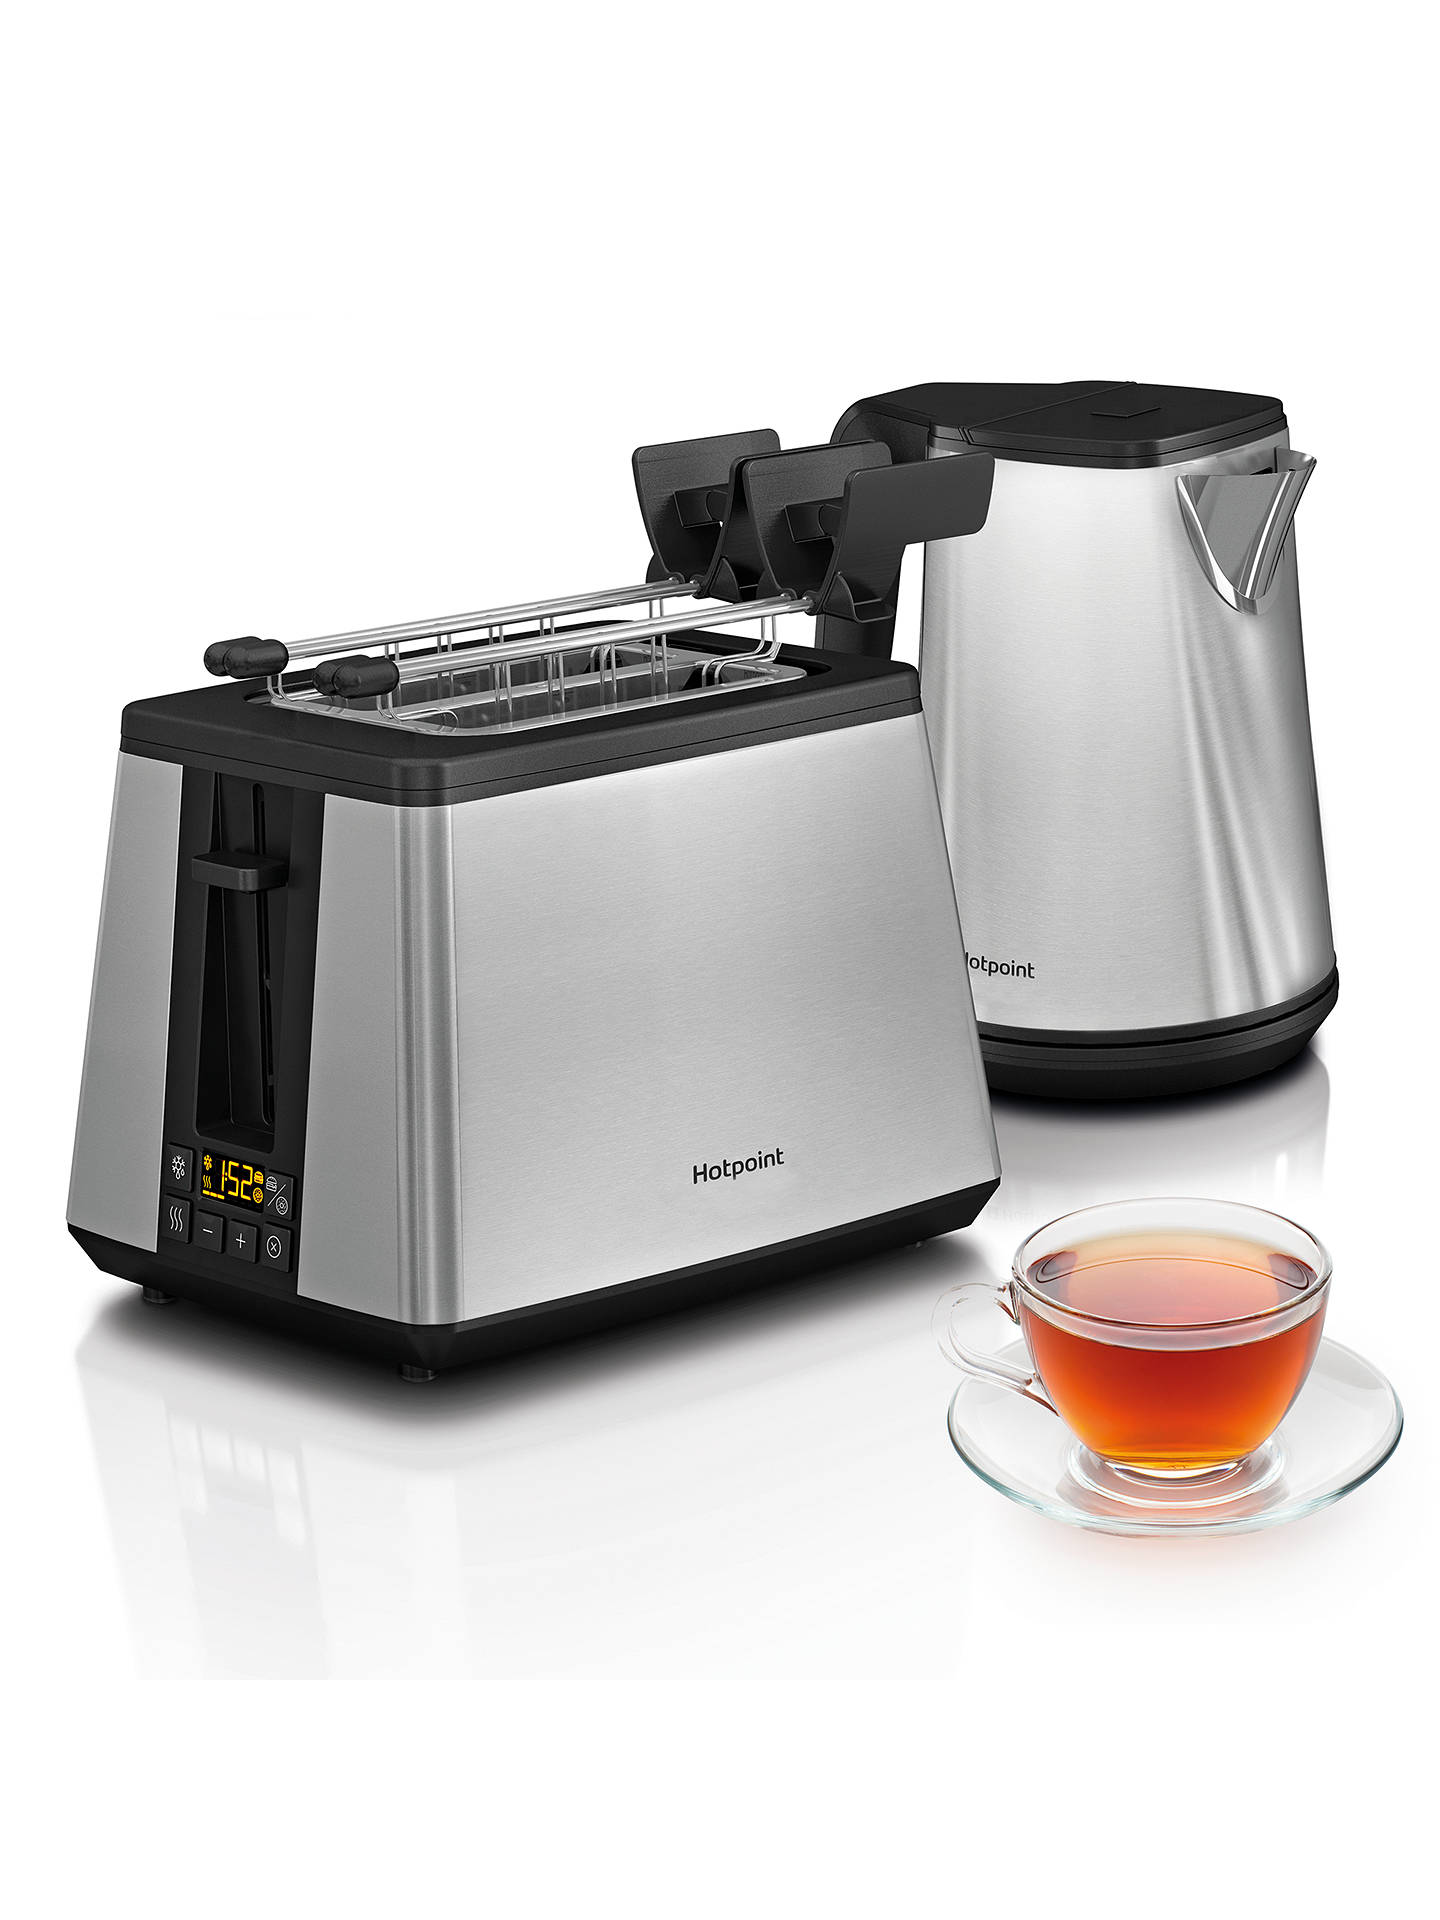 Shop Hotpoint Toasters up to 70% Off | DealDoodle